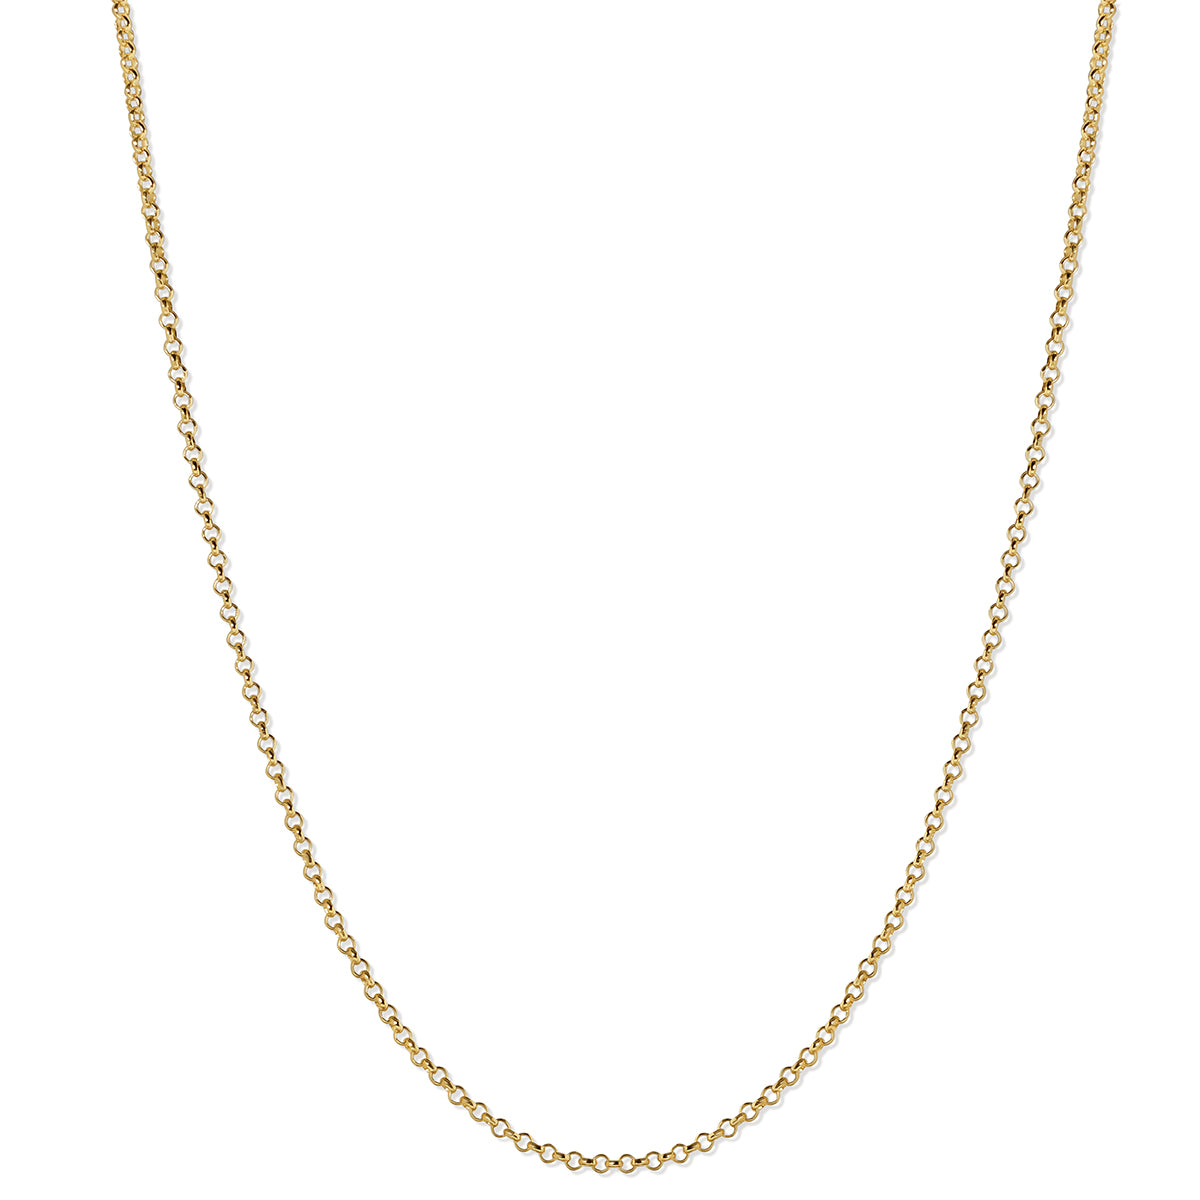 18ct Solid Gold Belcher Chain Necklace